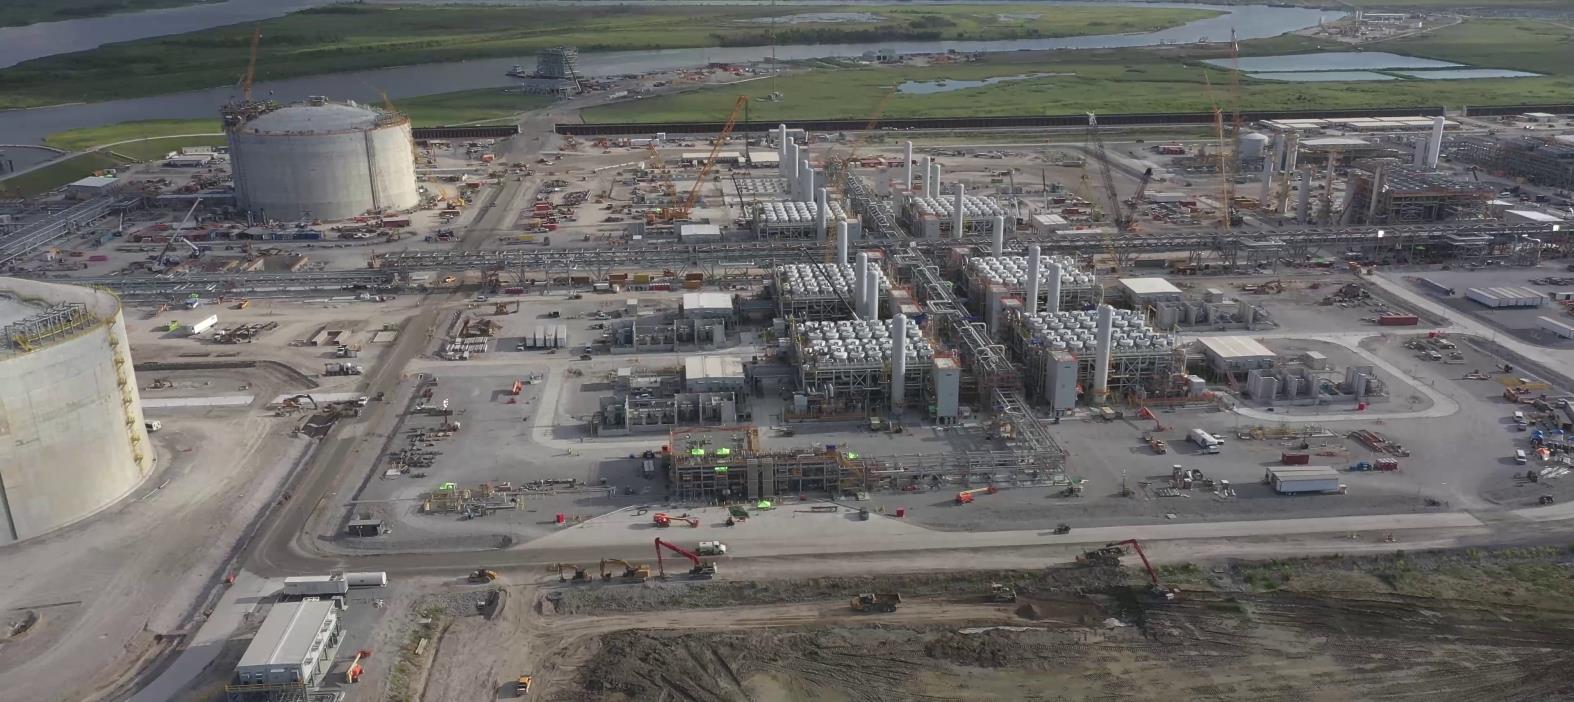 EIA says US LNG exports to stay at high levels on strong demand, new trains